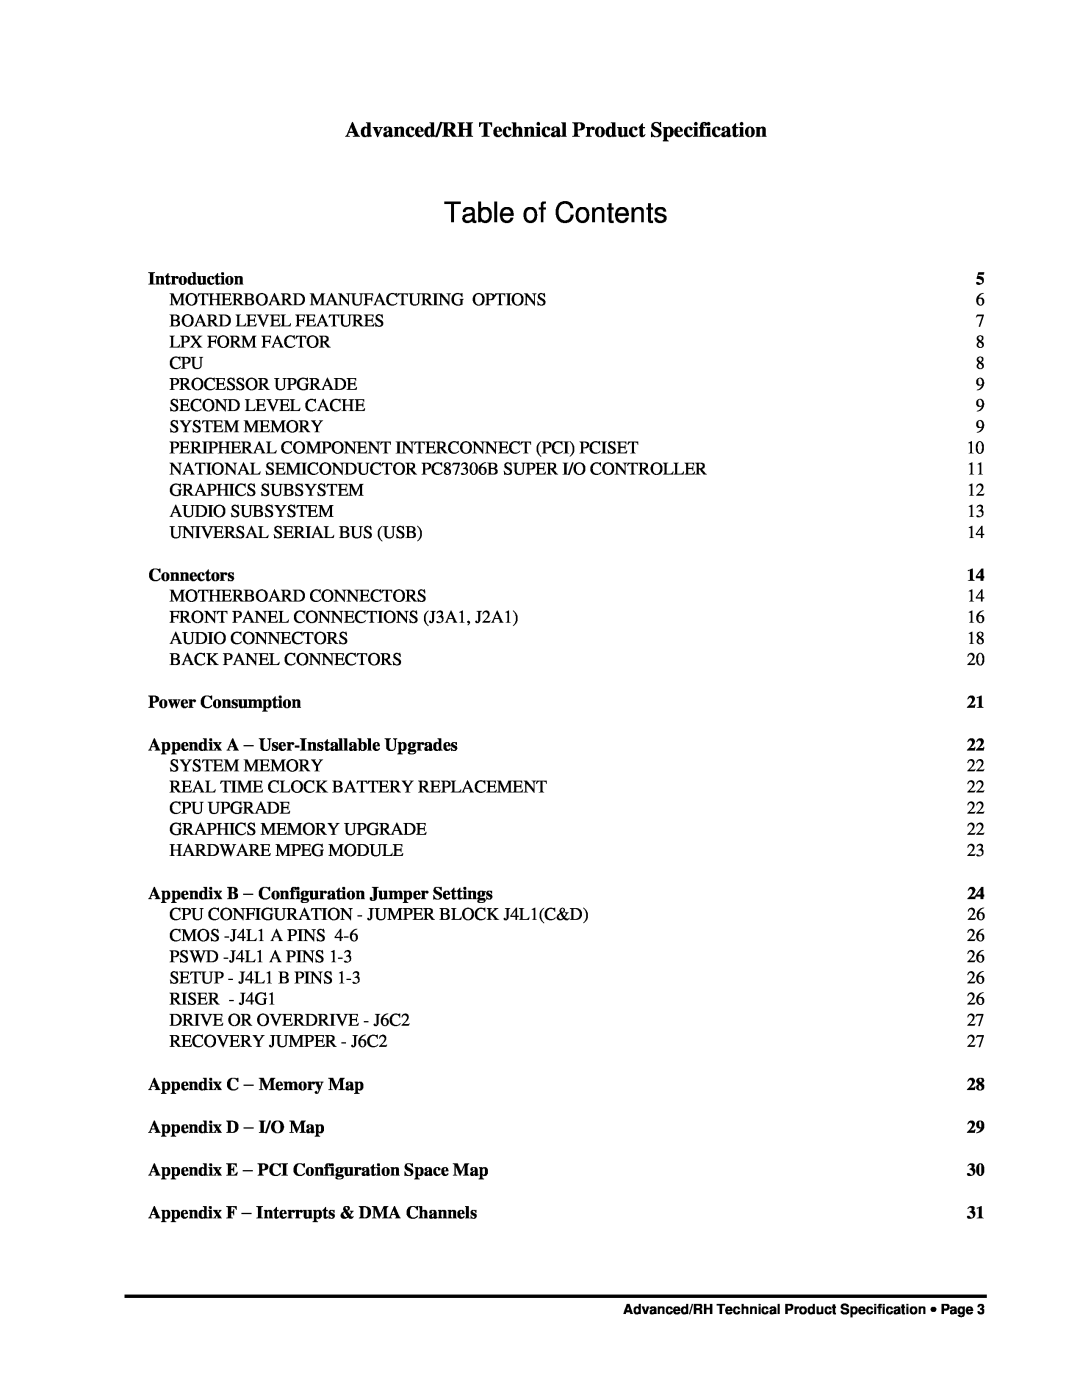 Intel 281809-003 manual Advanced/RH Technical Product Specification, Table of Contents 